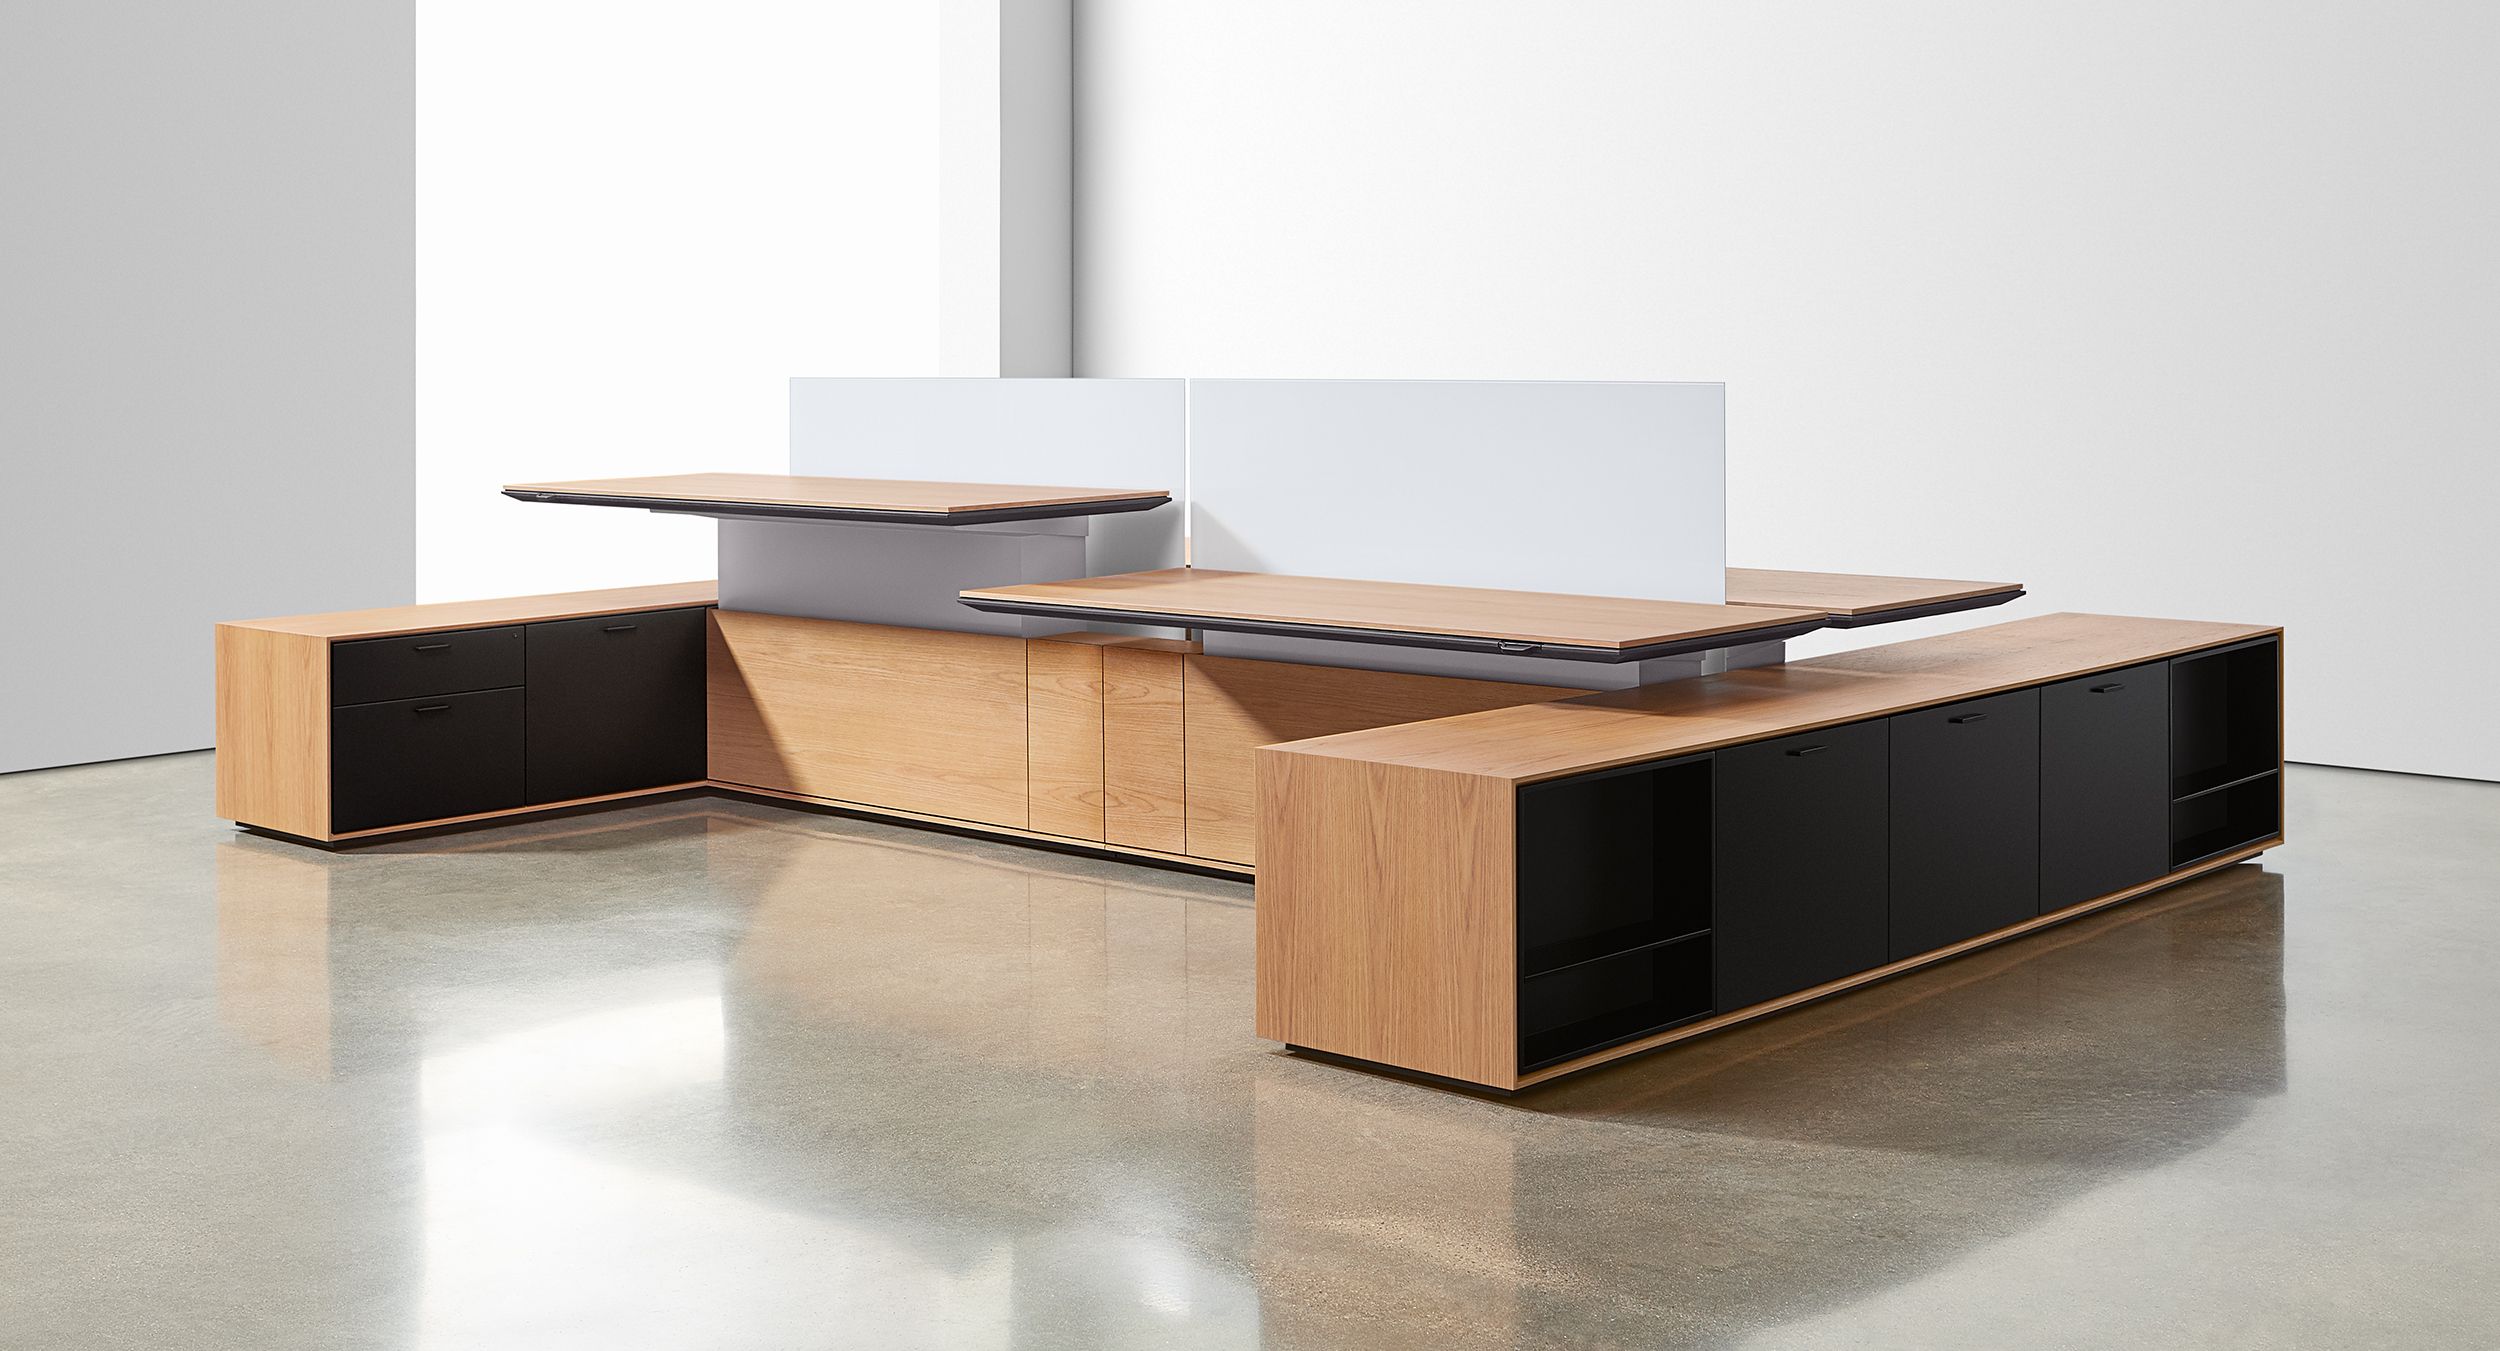 Adjustable-height desking and thoughtful storage are beautifully integrated into a total solution.